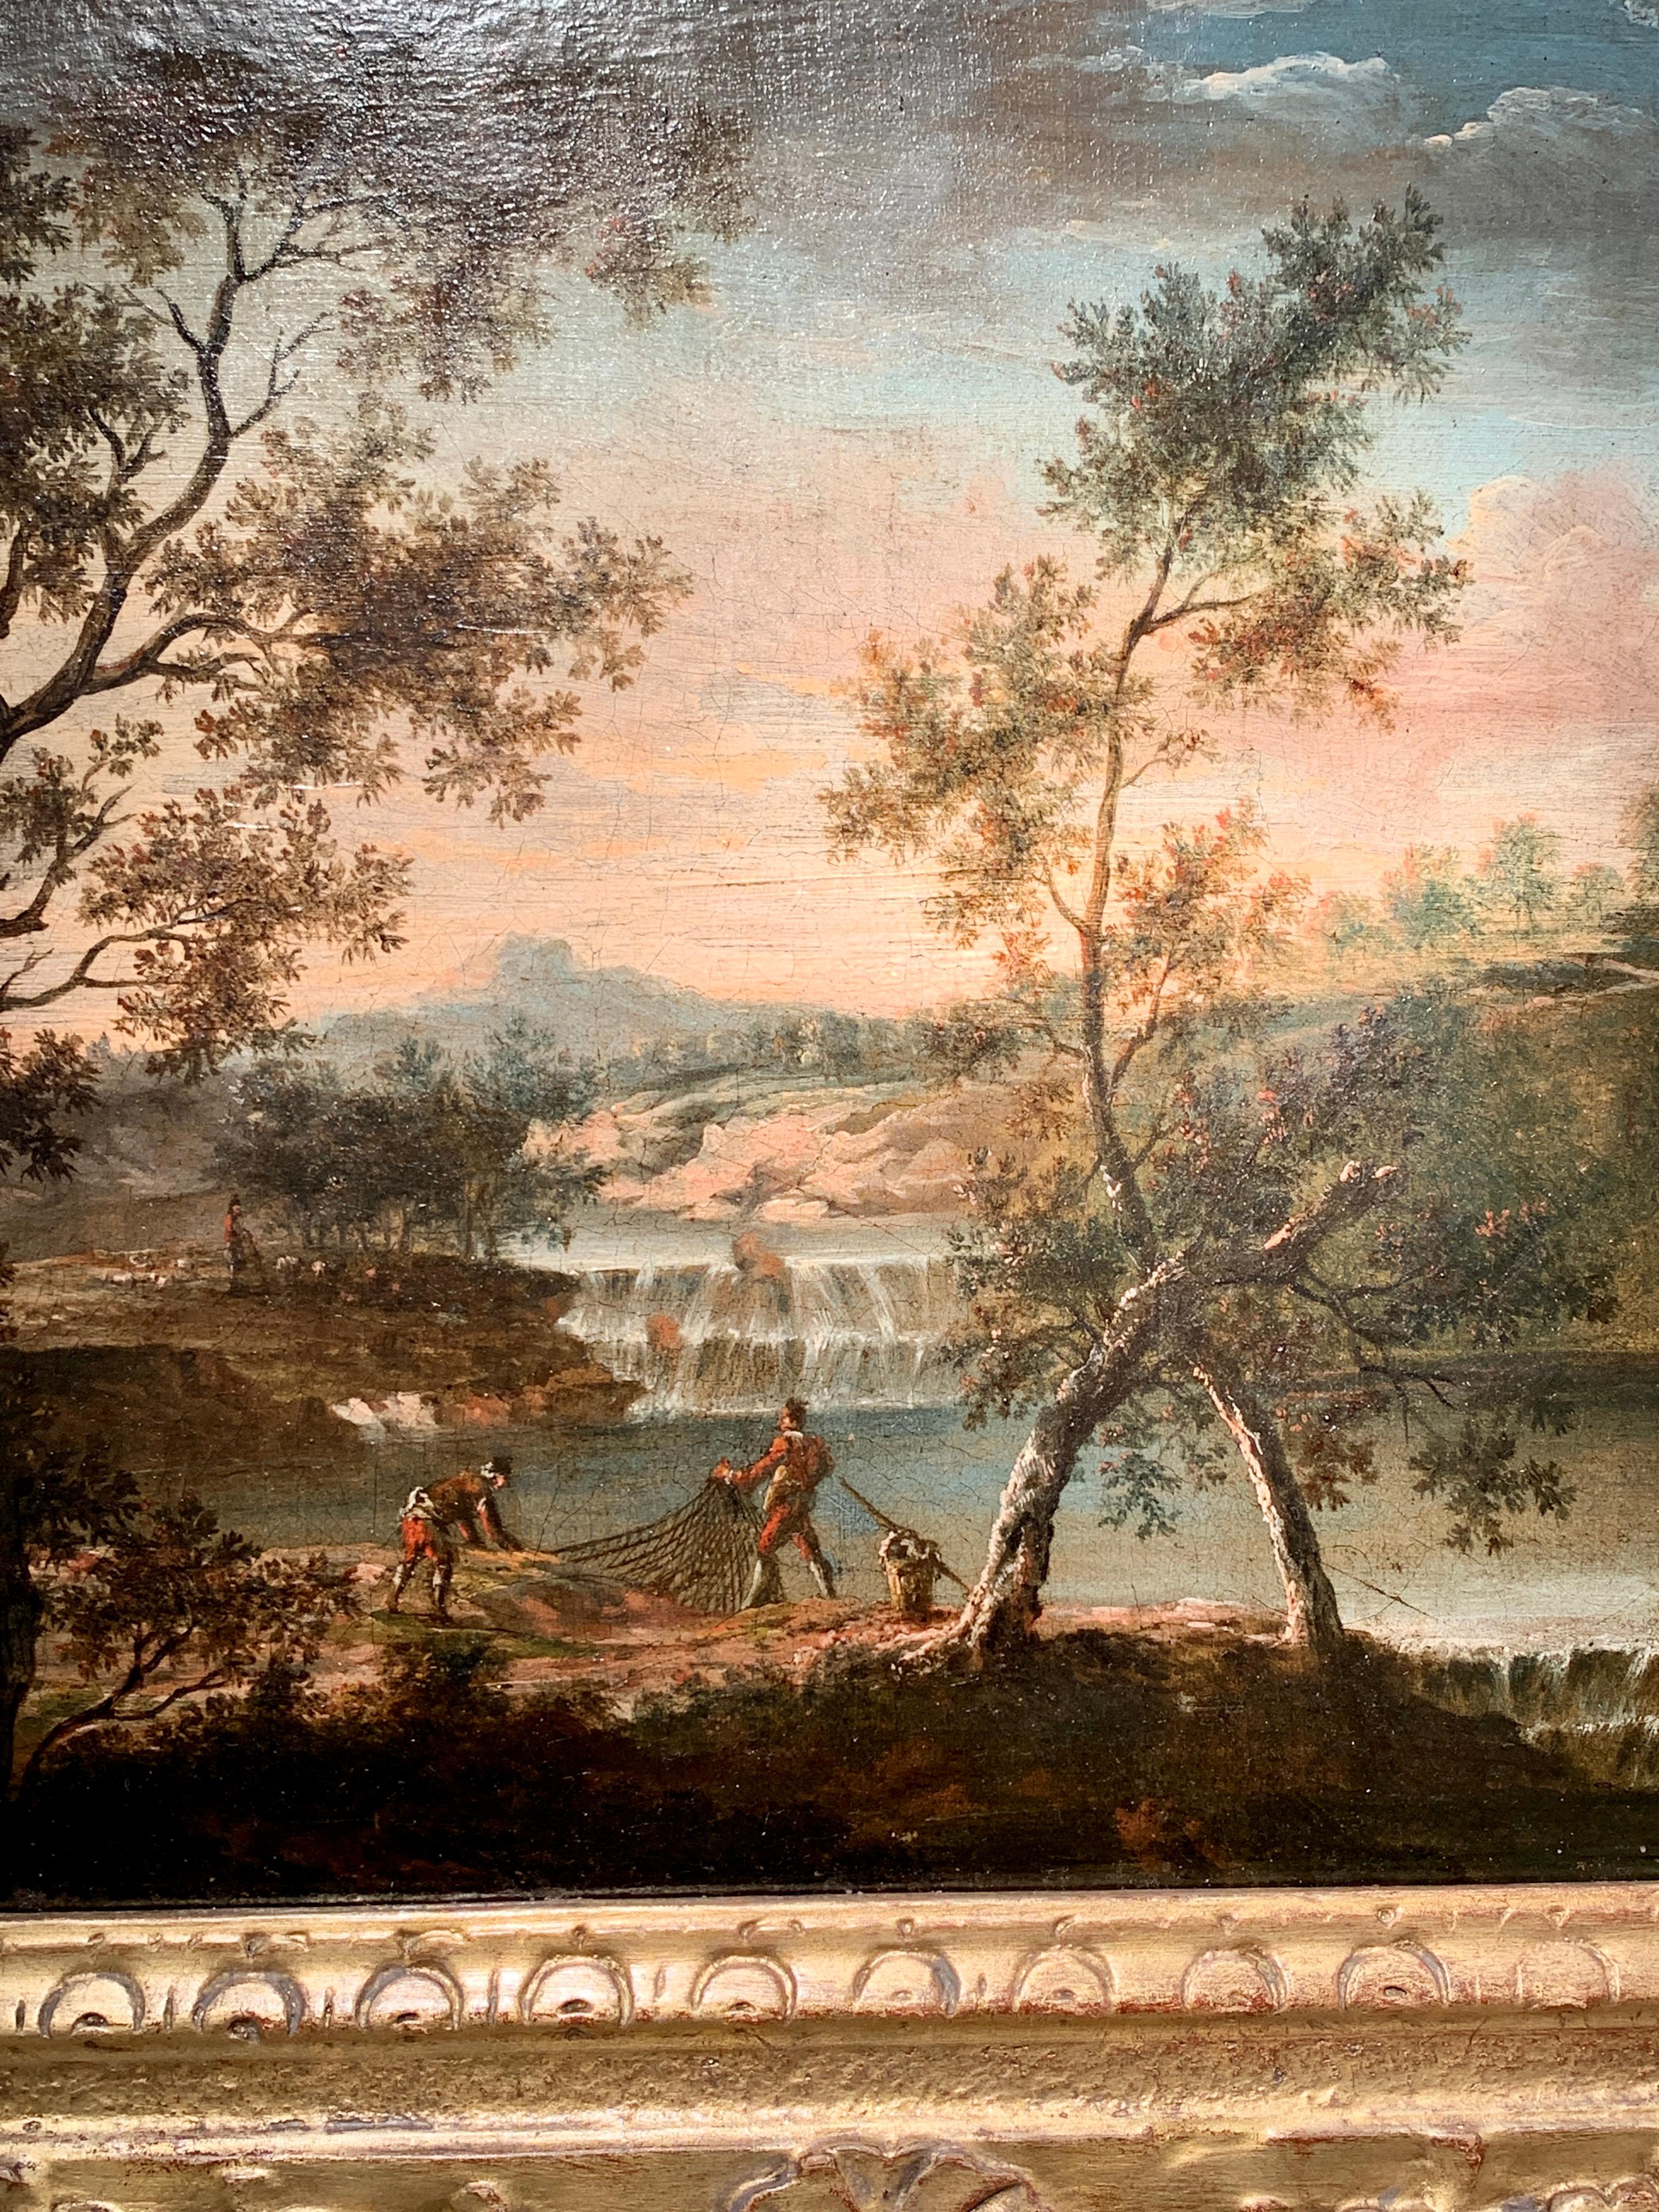 18th century English Antique landscape with men fishing on a river landscape  - Painting by 18th Century English School